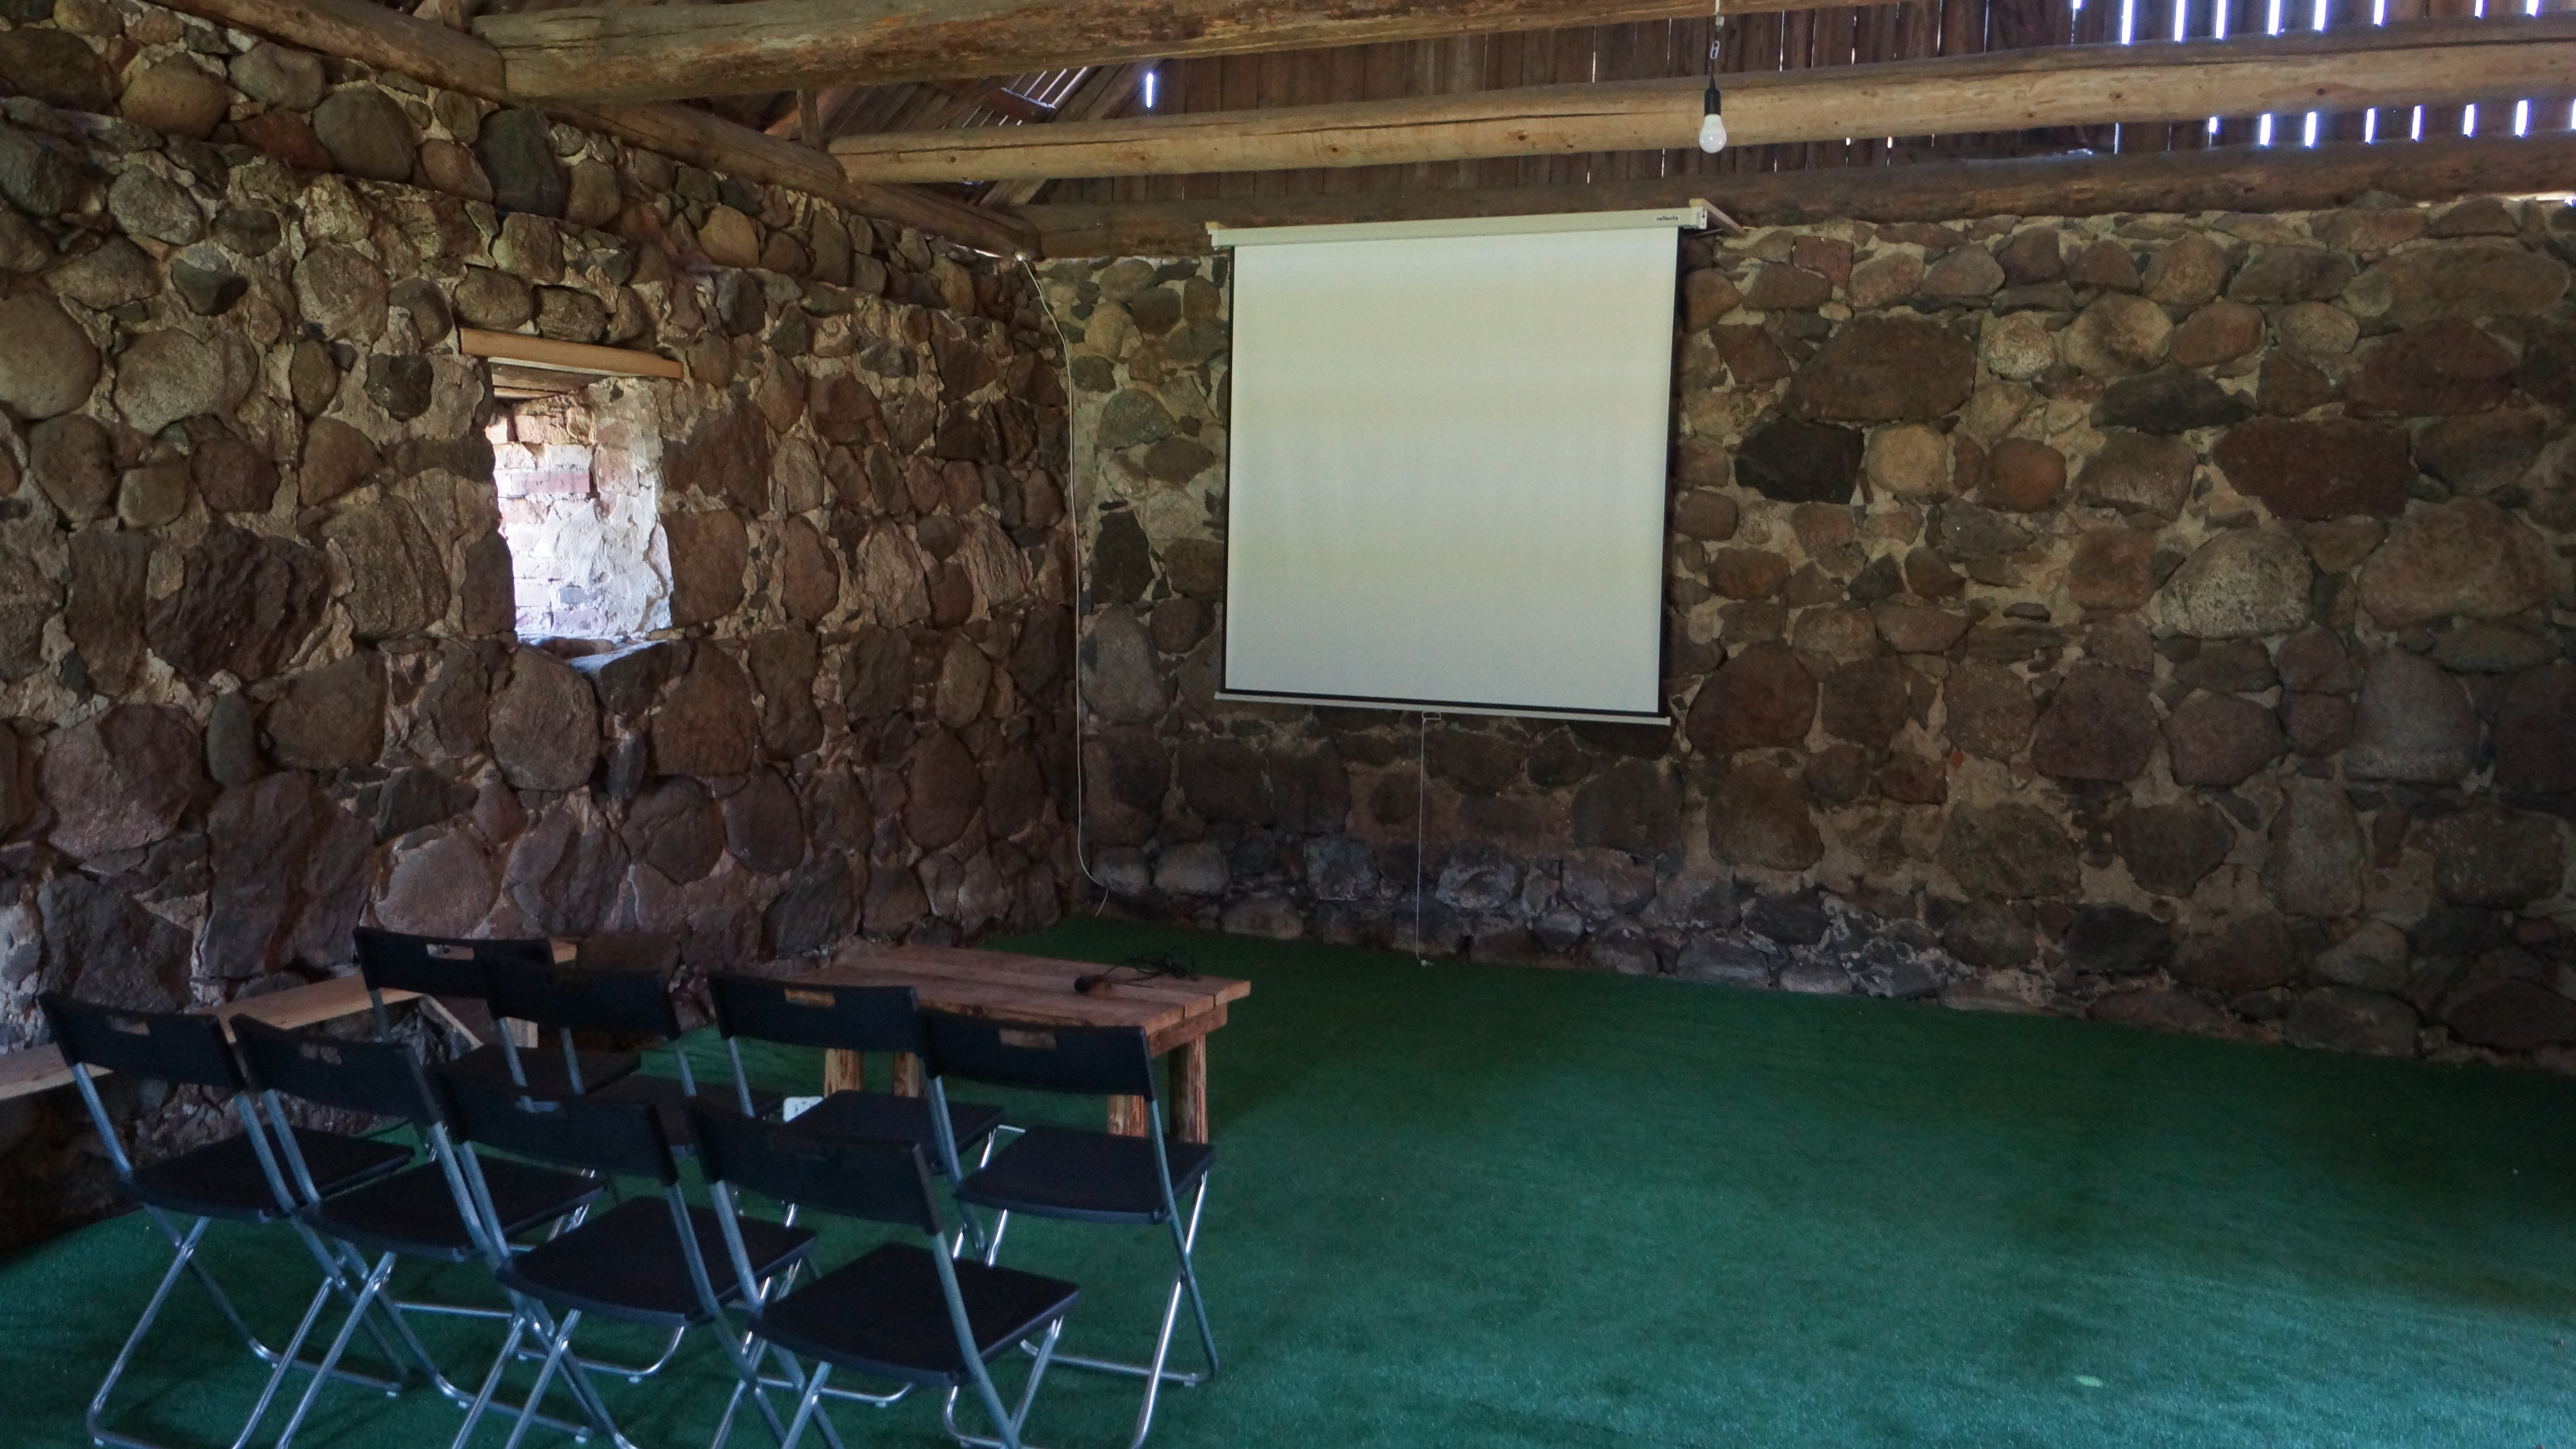 This is what the inside of the hemp schools meeting room looks like.